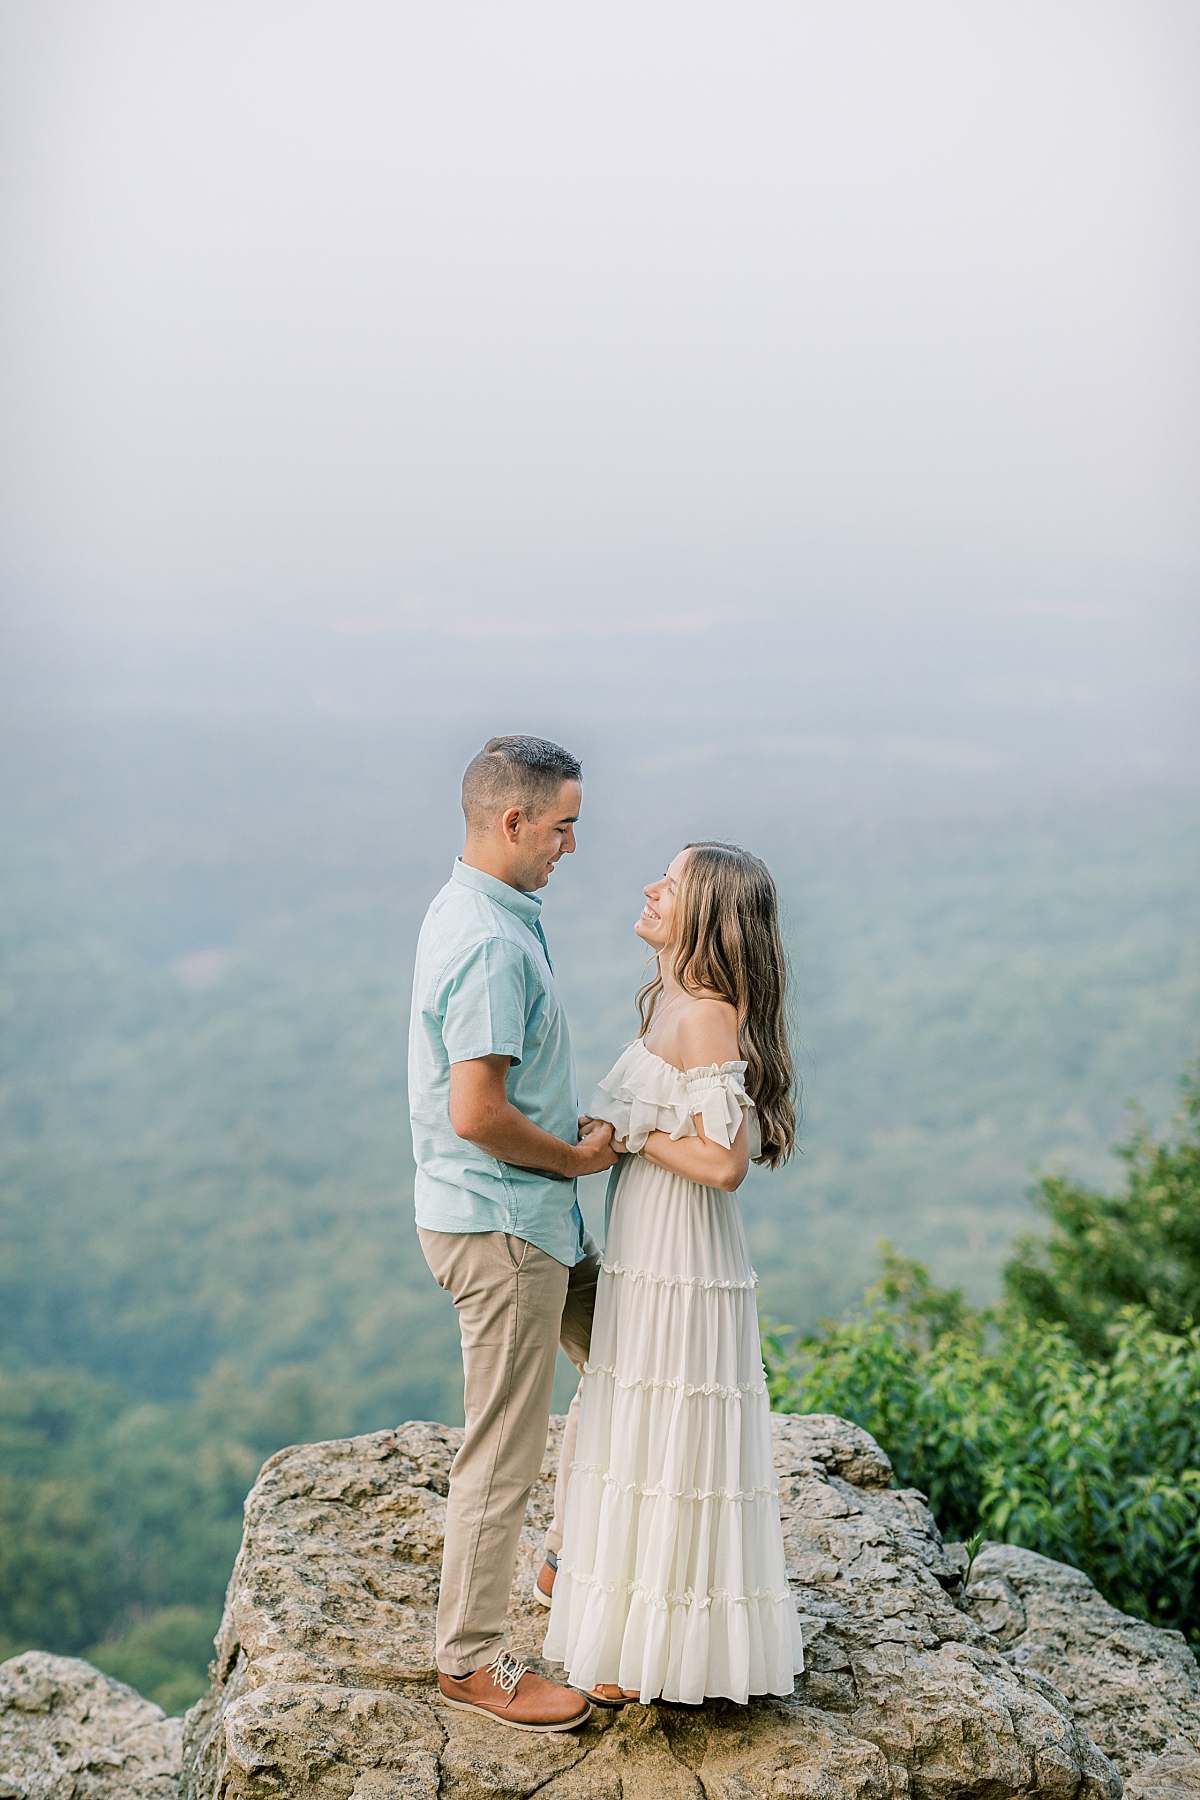 Engagement photo of a couple at Hawk Mountain Sanctuary in PA. The couple stands on rocks with a beautiful view